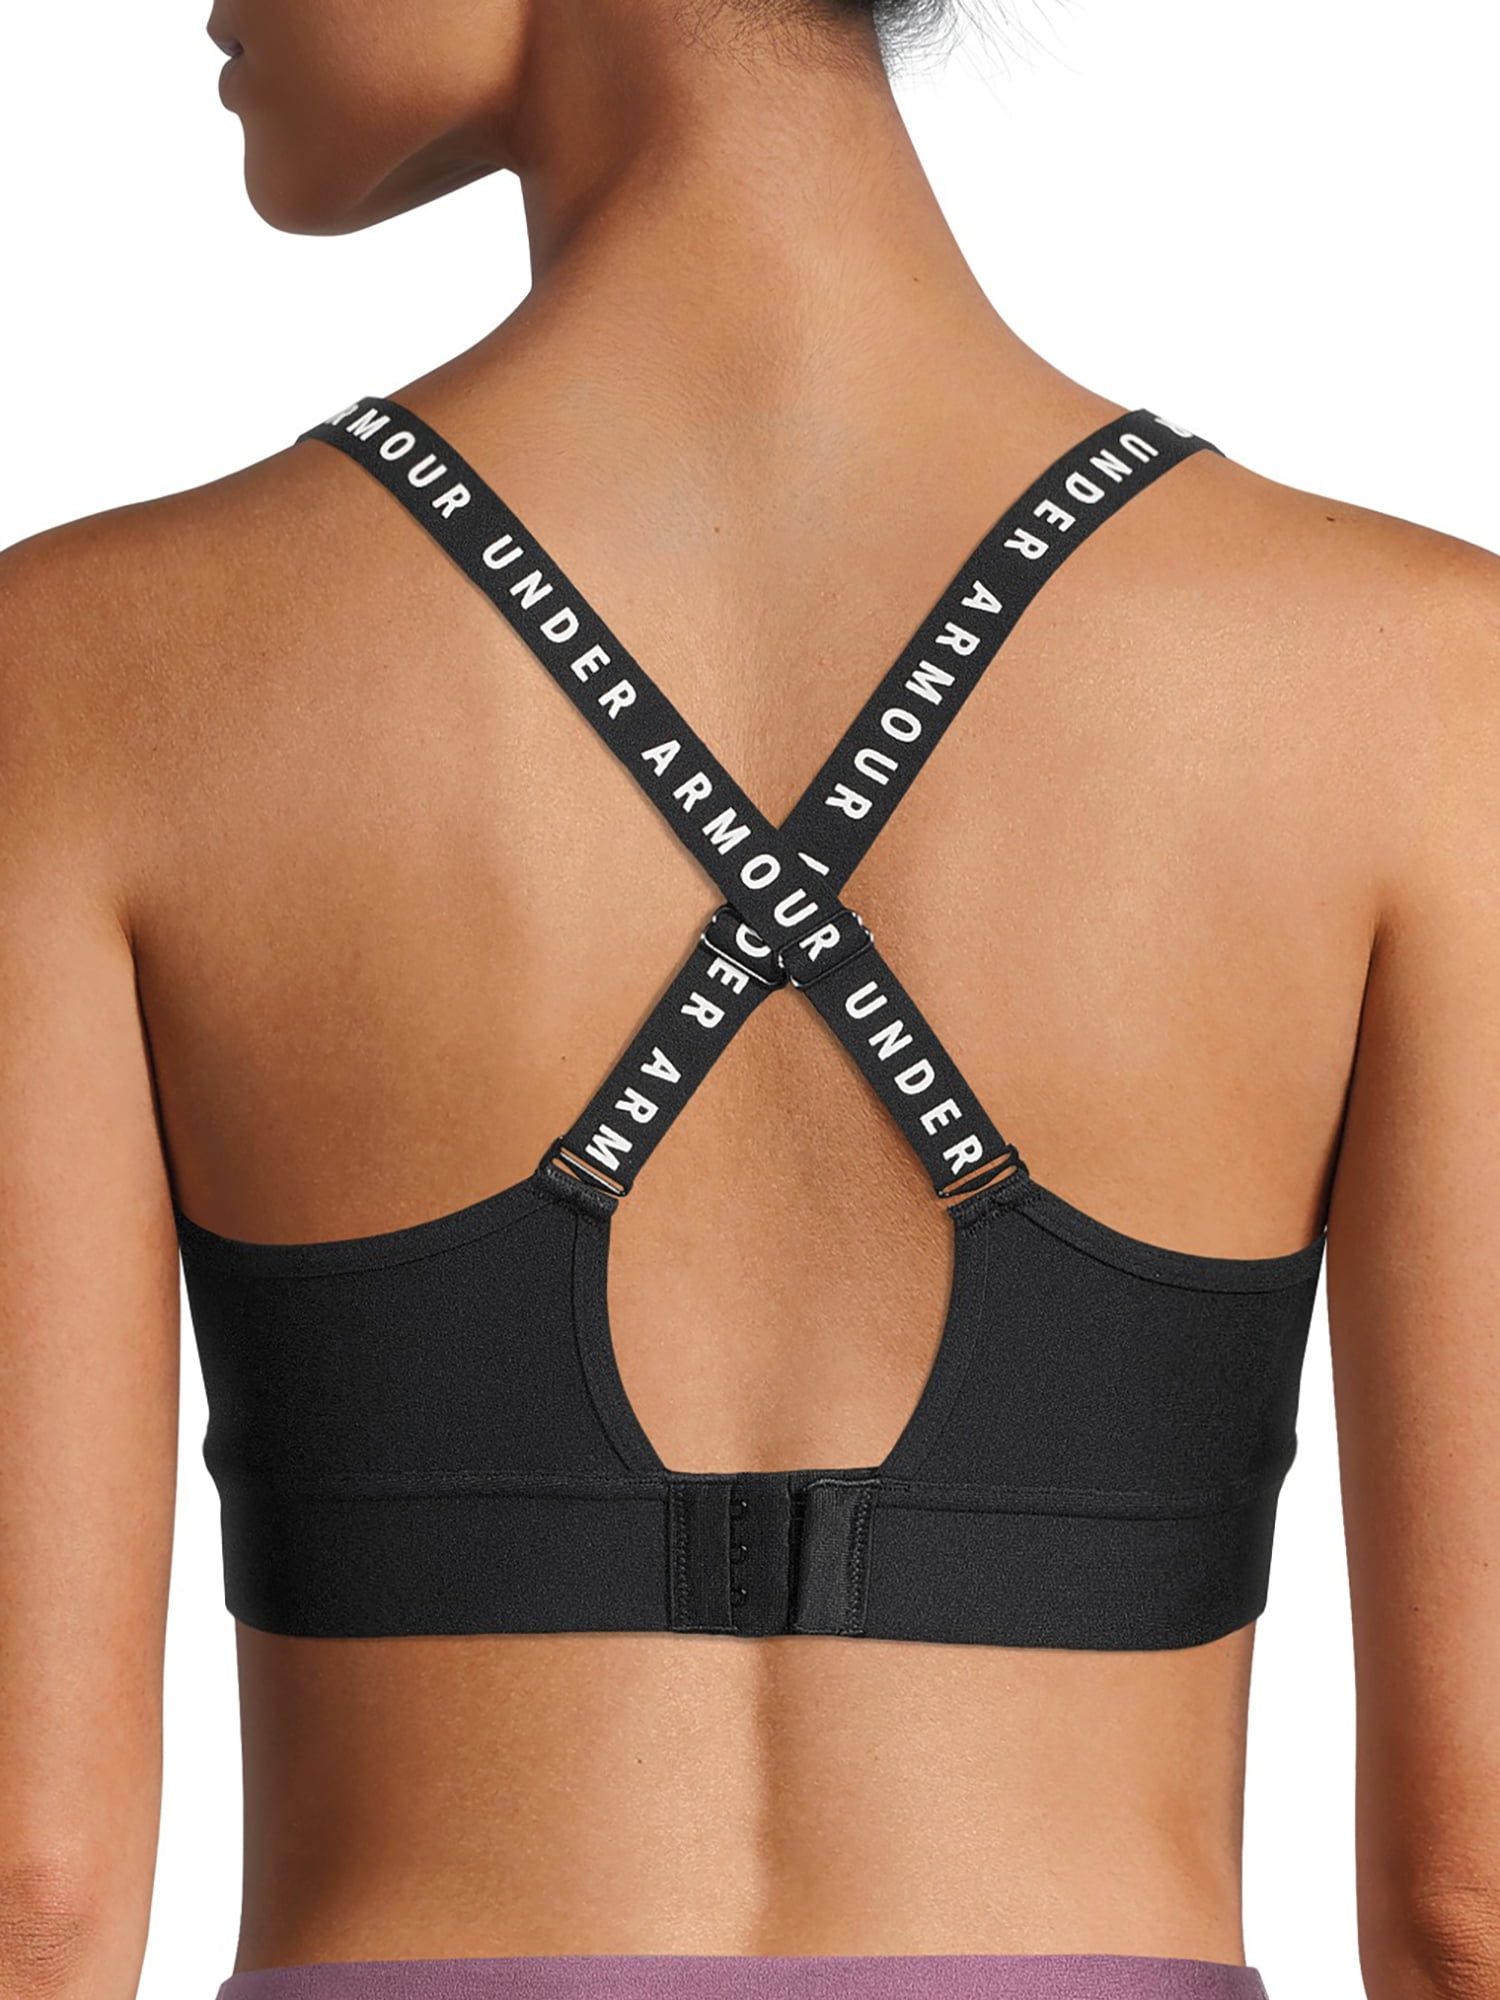 underarmour most loved & best-selling sports bra just got a whole lot  better! Introducing the Infinity Bra 2.0, with hybrid band & cup…